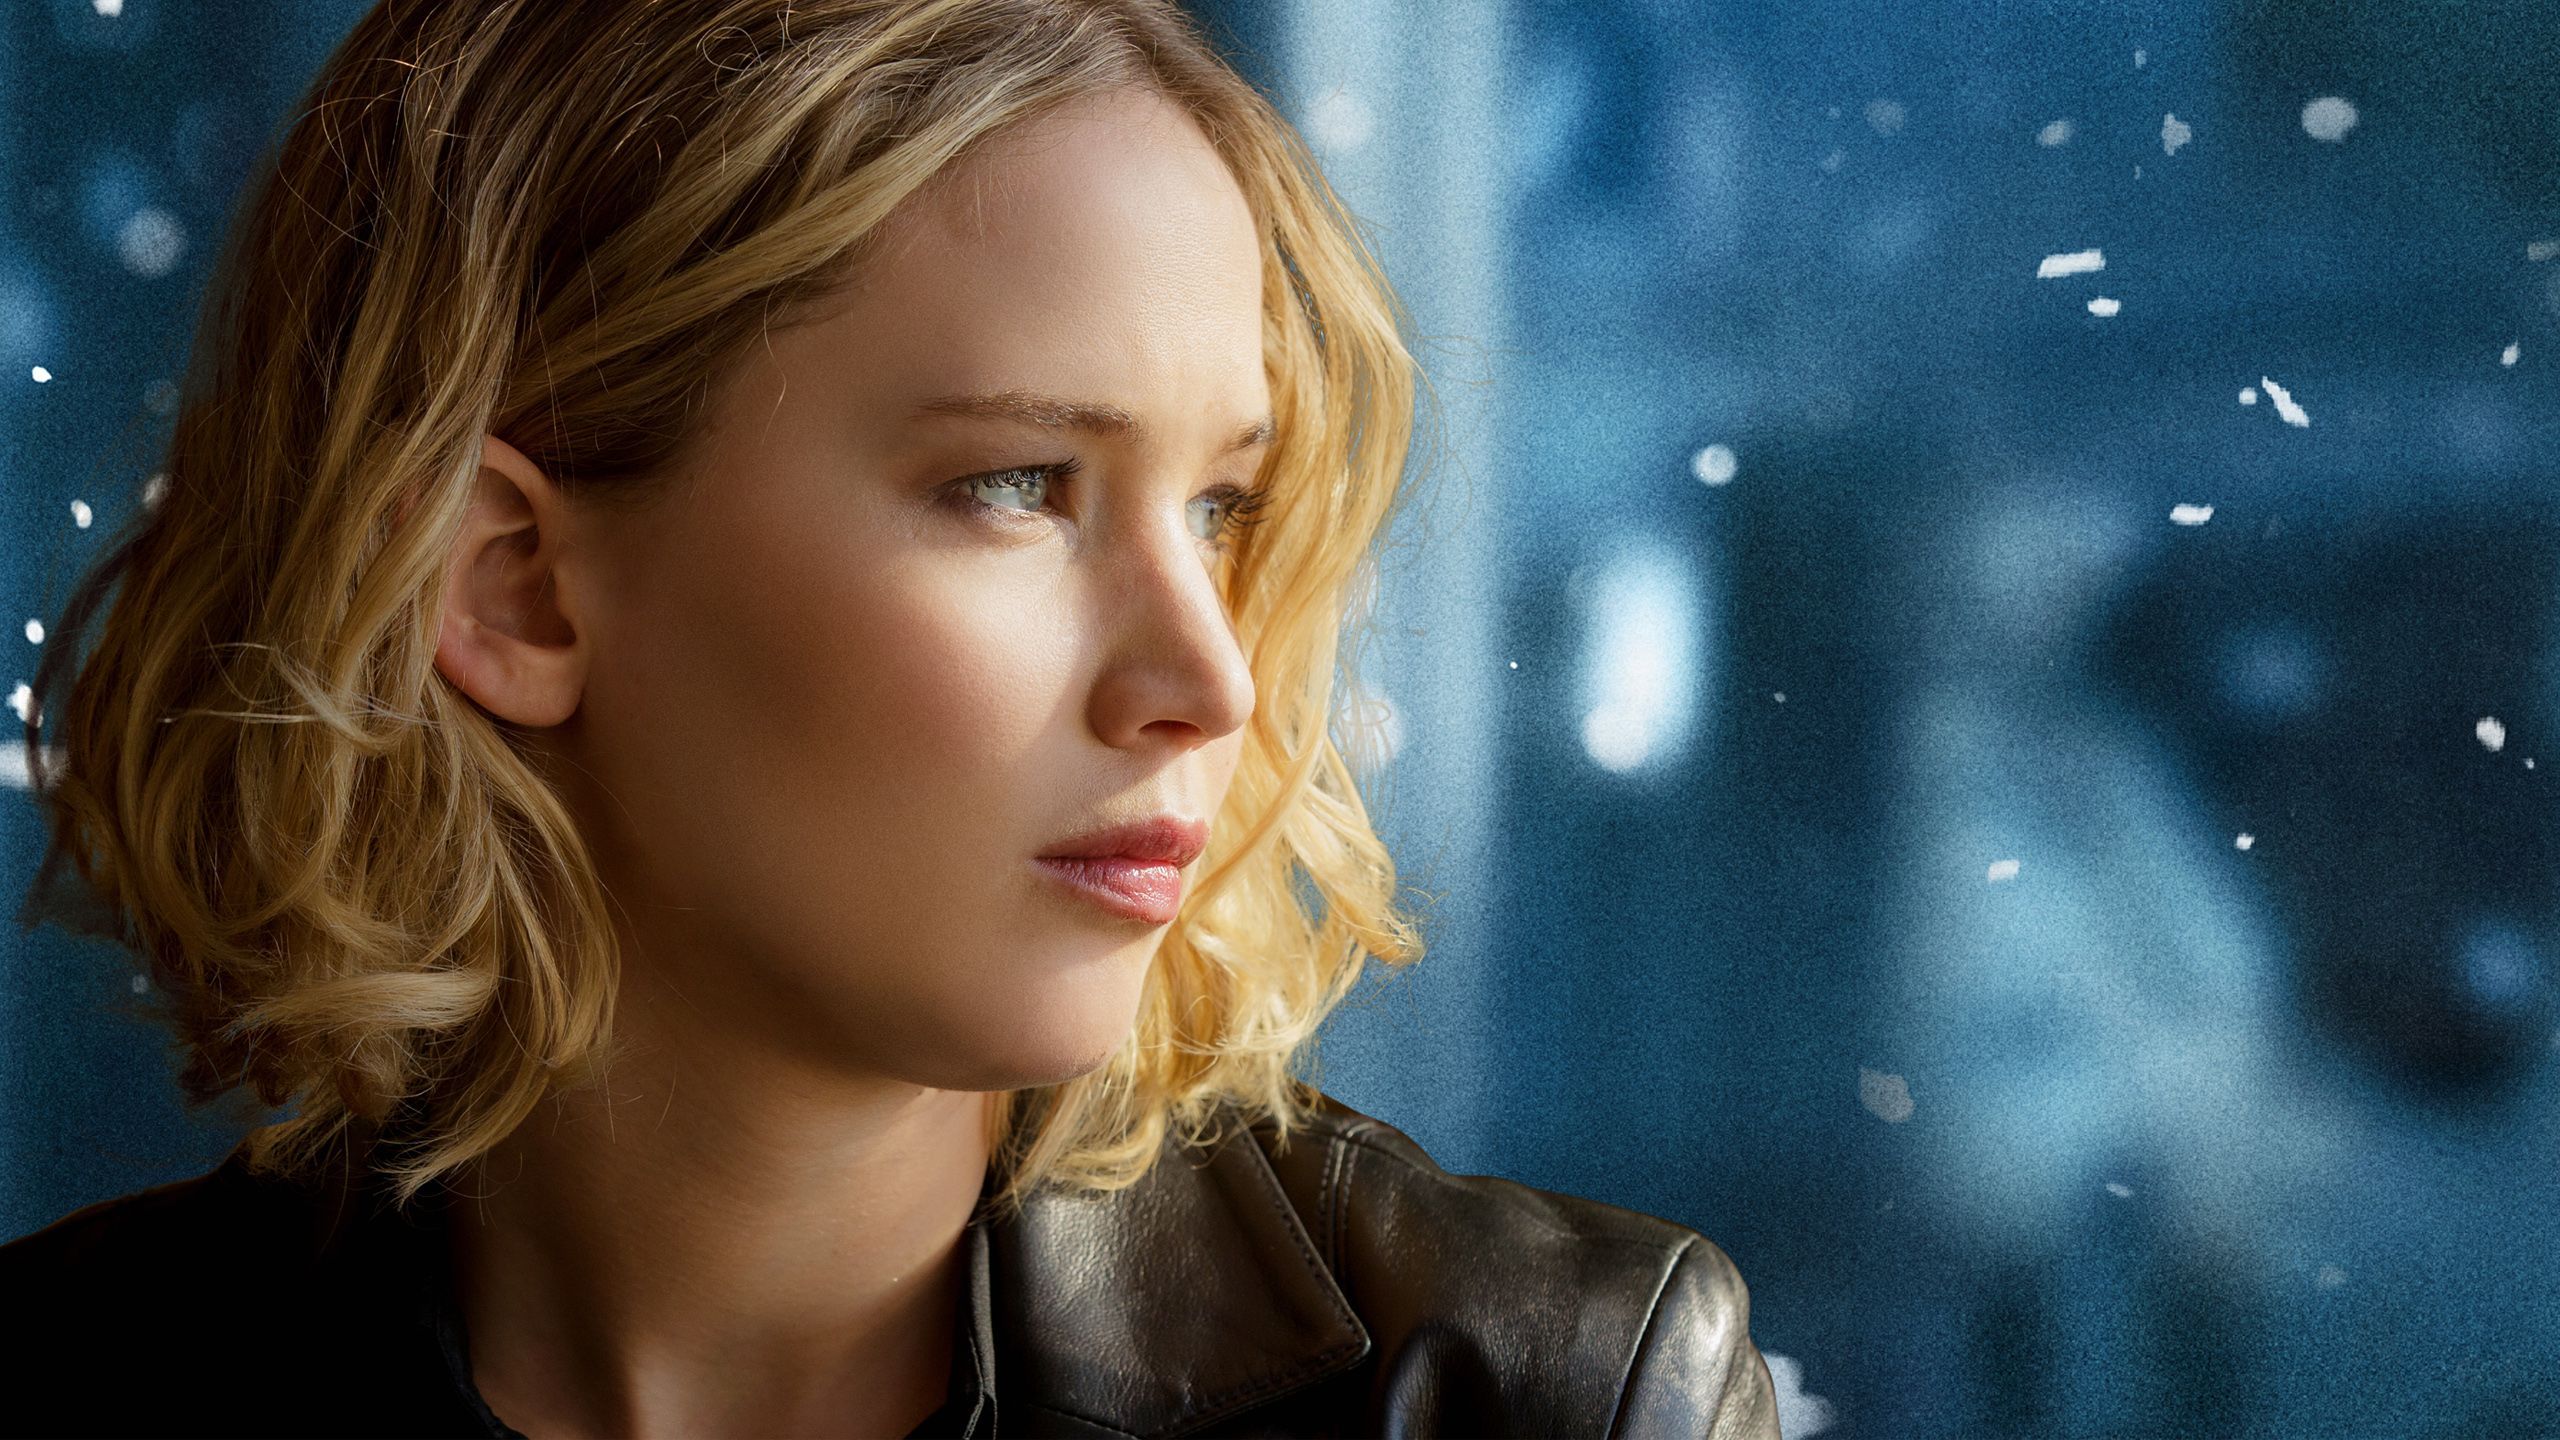 Jennifer Lawrence looking into the distance in a leather jacket in the movie Joy. - Jennifer Lawrence